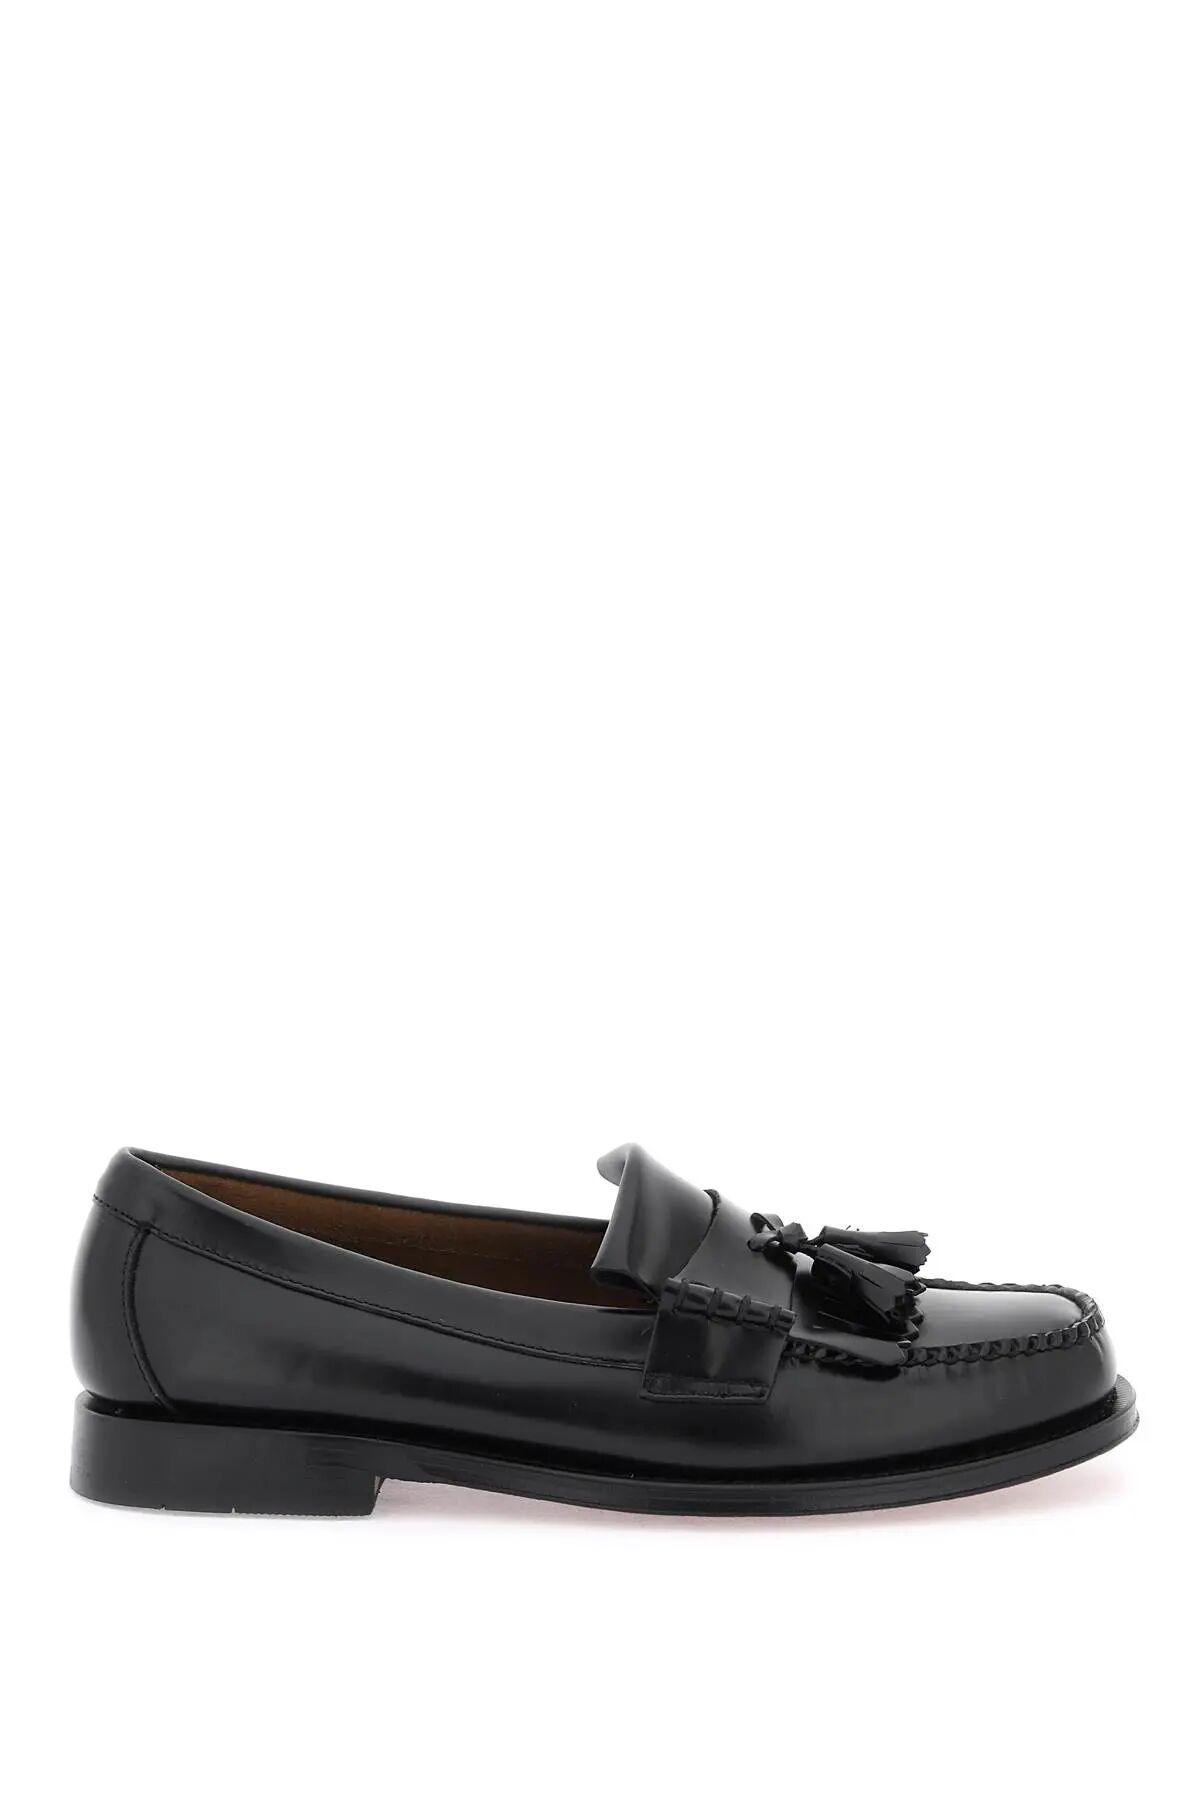 G.H. BASS Esther Kiltie Weejuns loafers  - Black - male - Size: 42